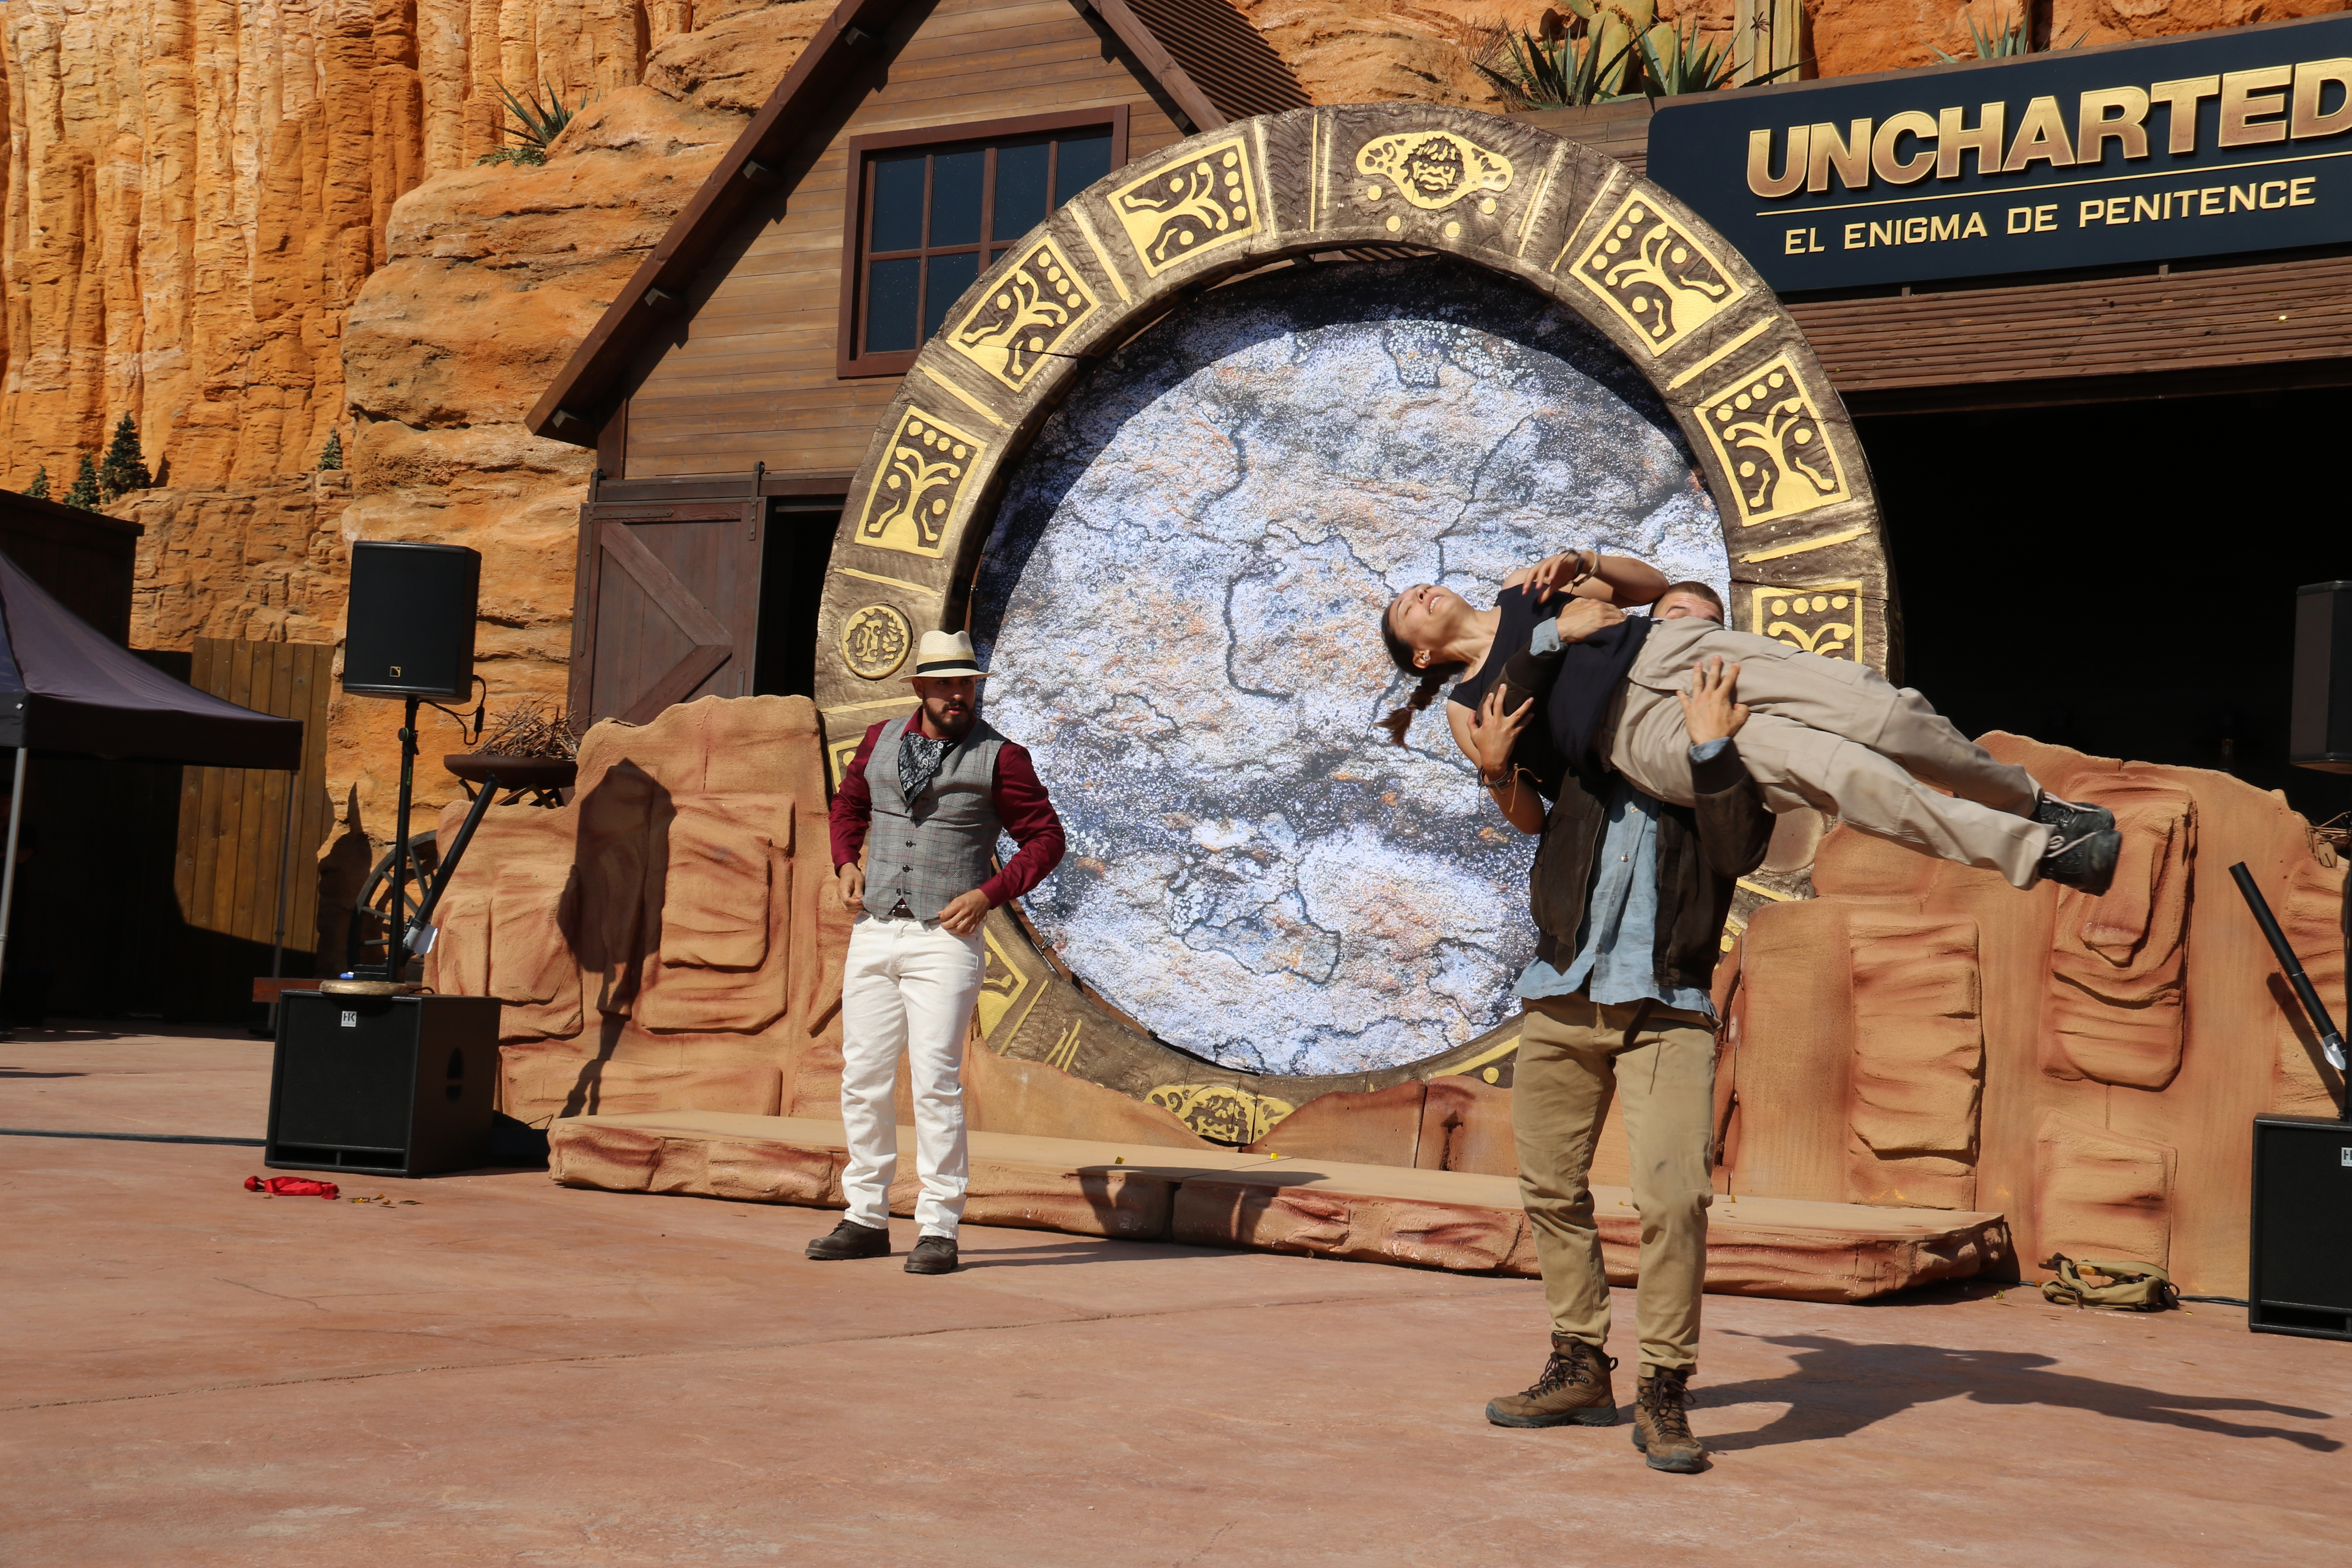 PortAventura's amusement park newest ride presentation of Uncharted: The Enigma of Penitence on June 16, 2023